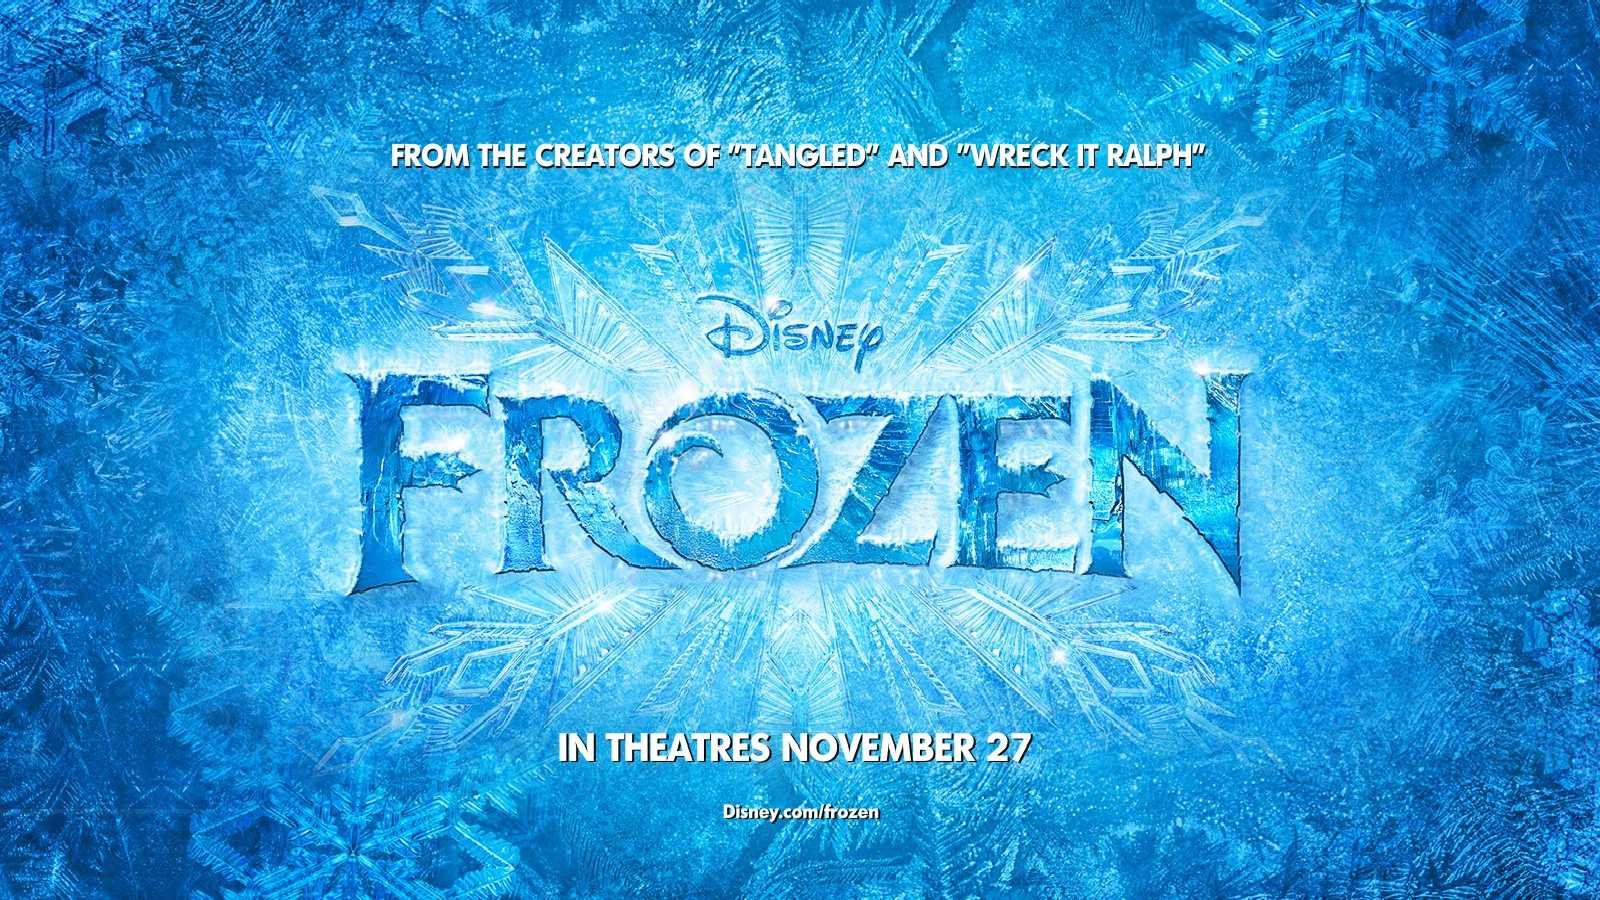 Kevin Swanson: “Frozen” cua Disney se day tre em tro thanh dong tinh